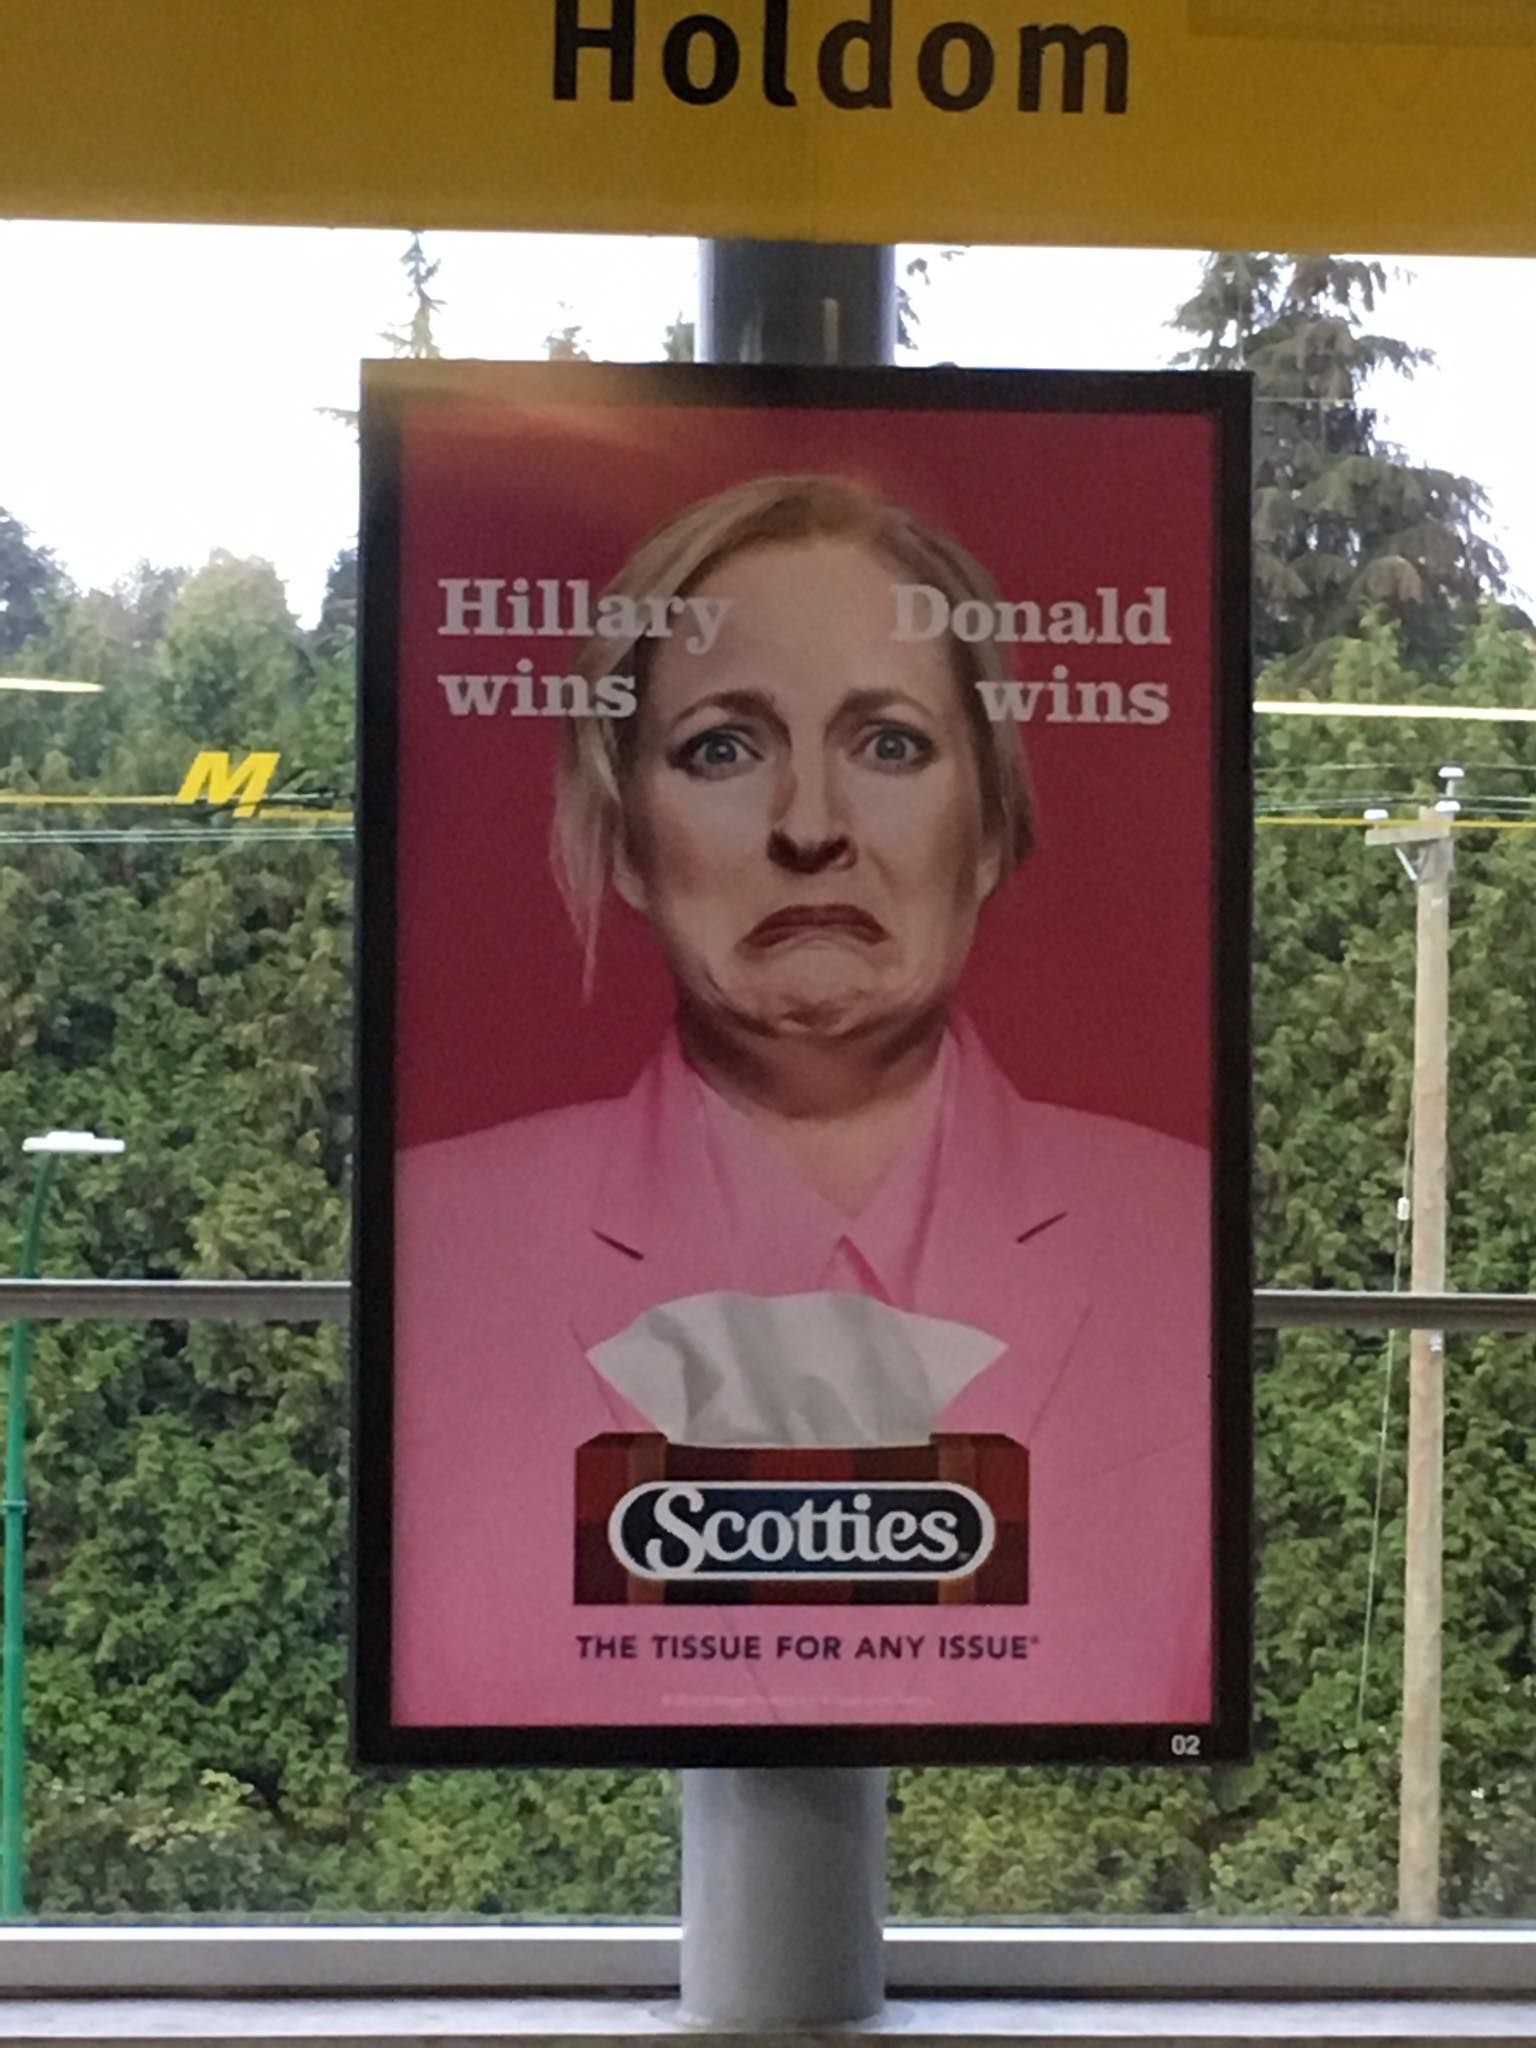 Vancouver Advertising